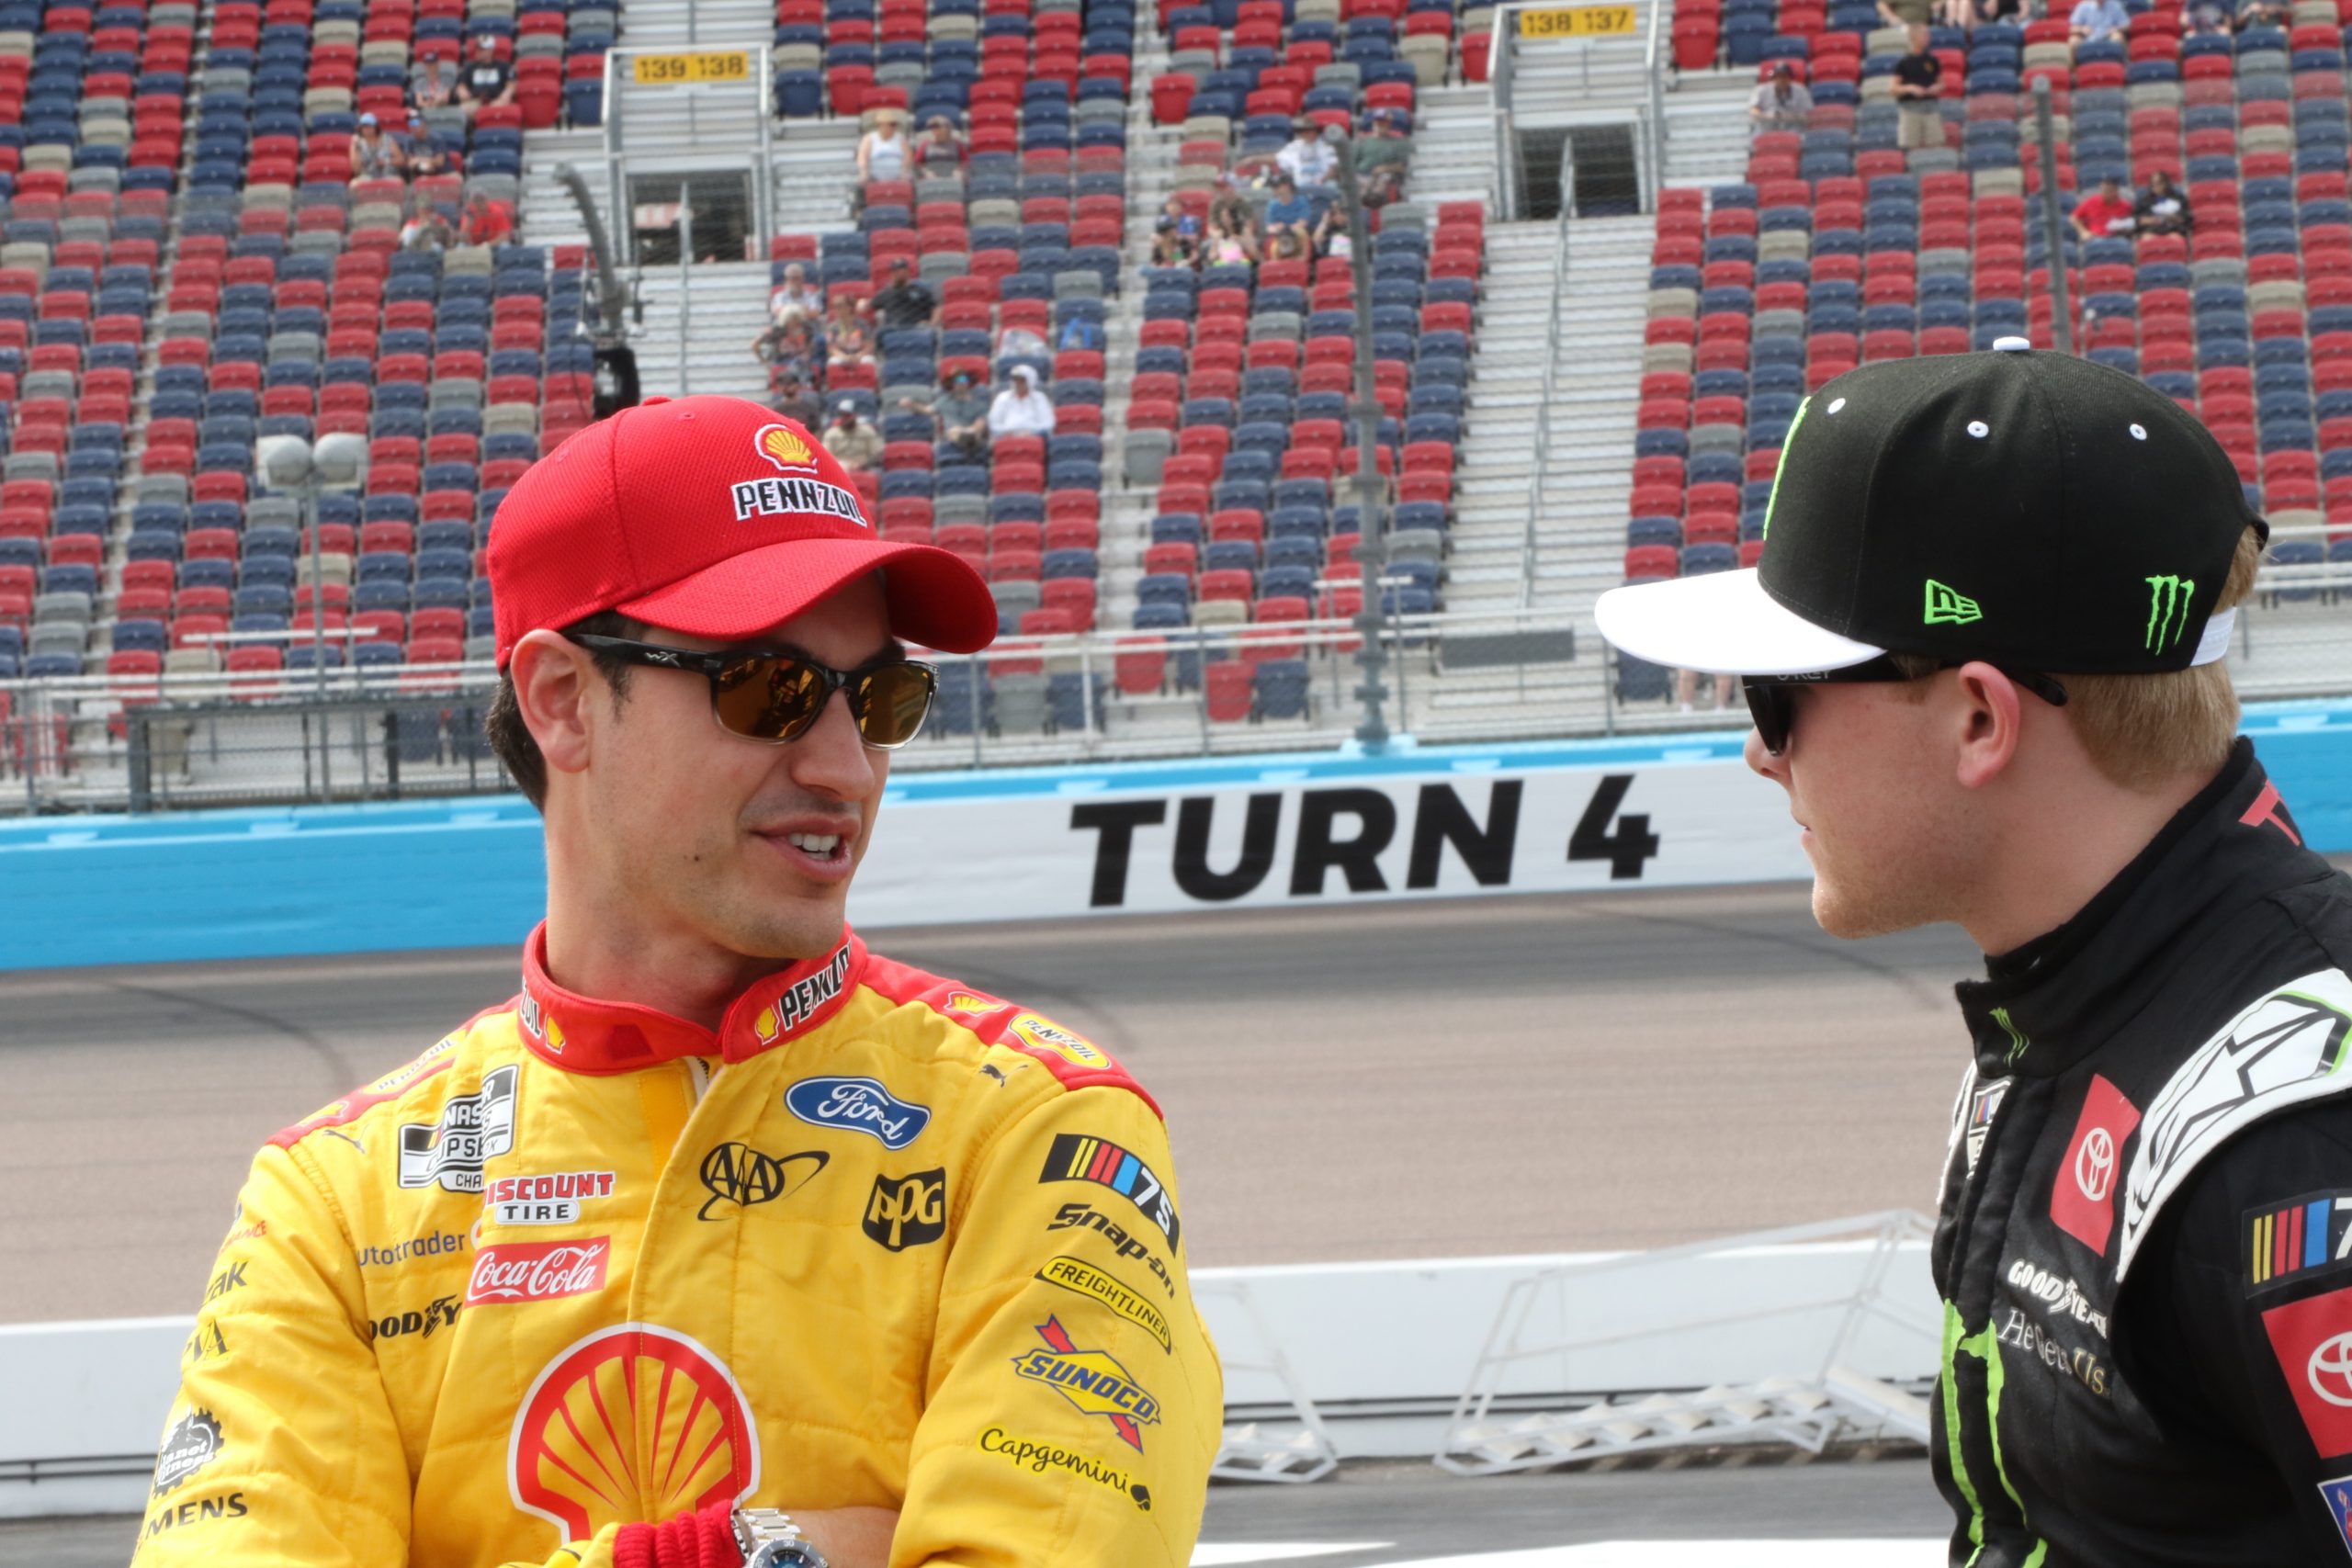 Joey Logano hopes for a much better race at Phoenix compared to last Sunday's Las Vegas struggles. (Photo: Christopher Vargas | The Podium Finish)